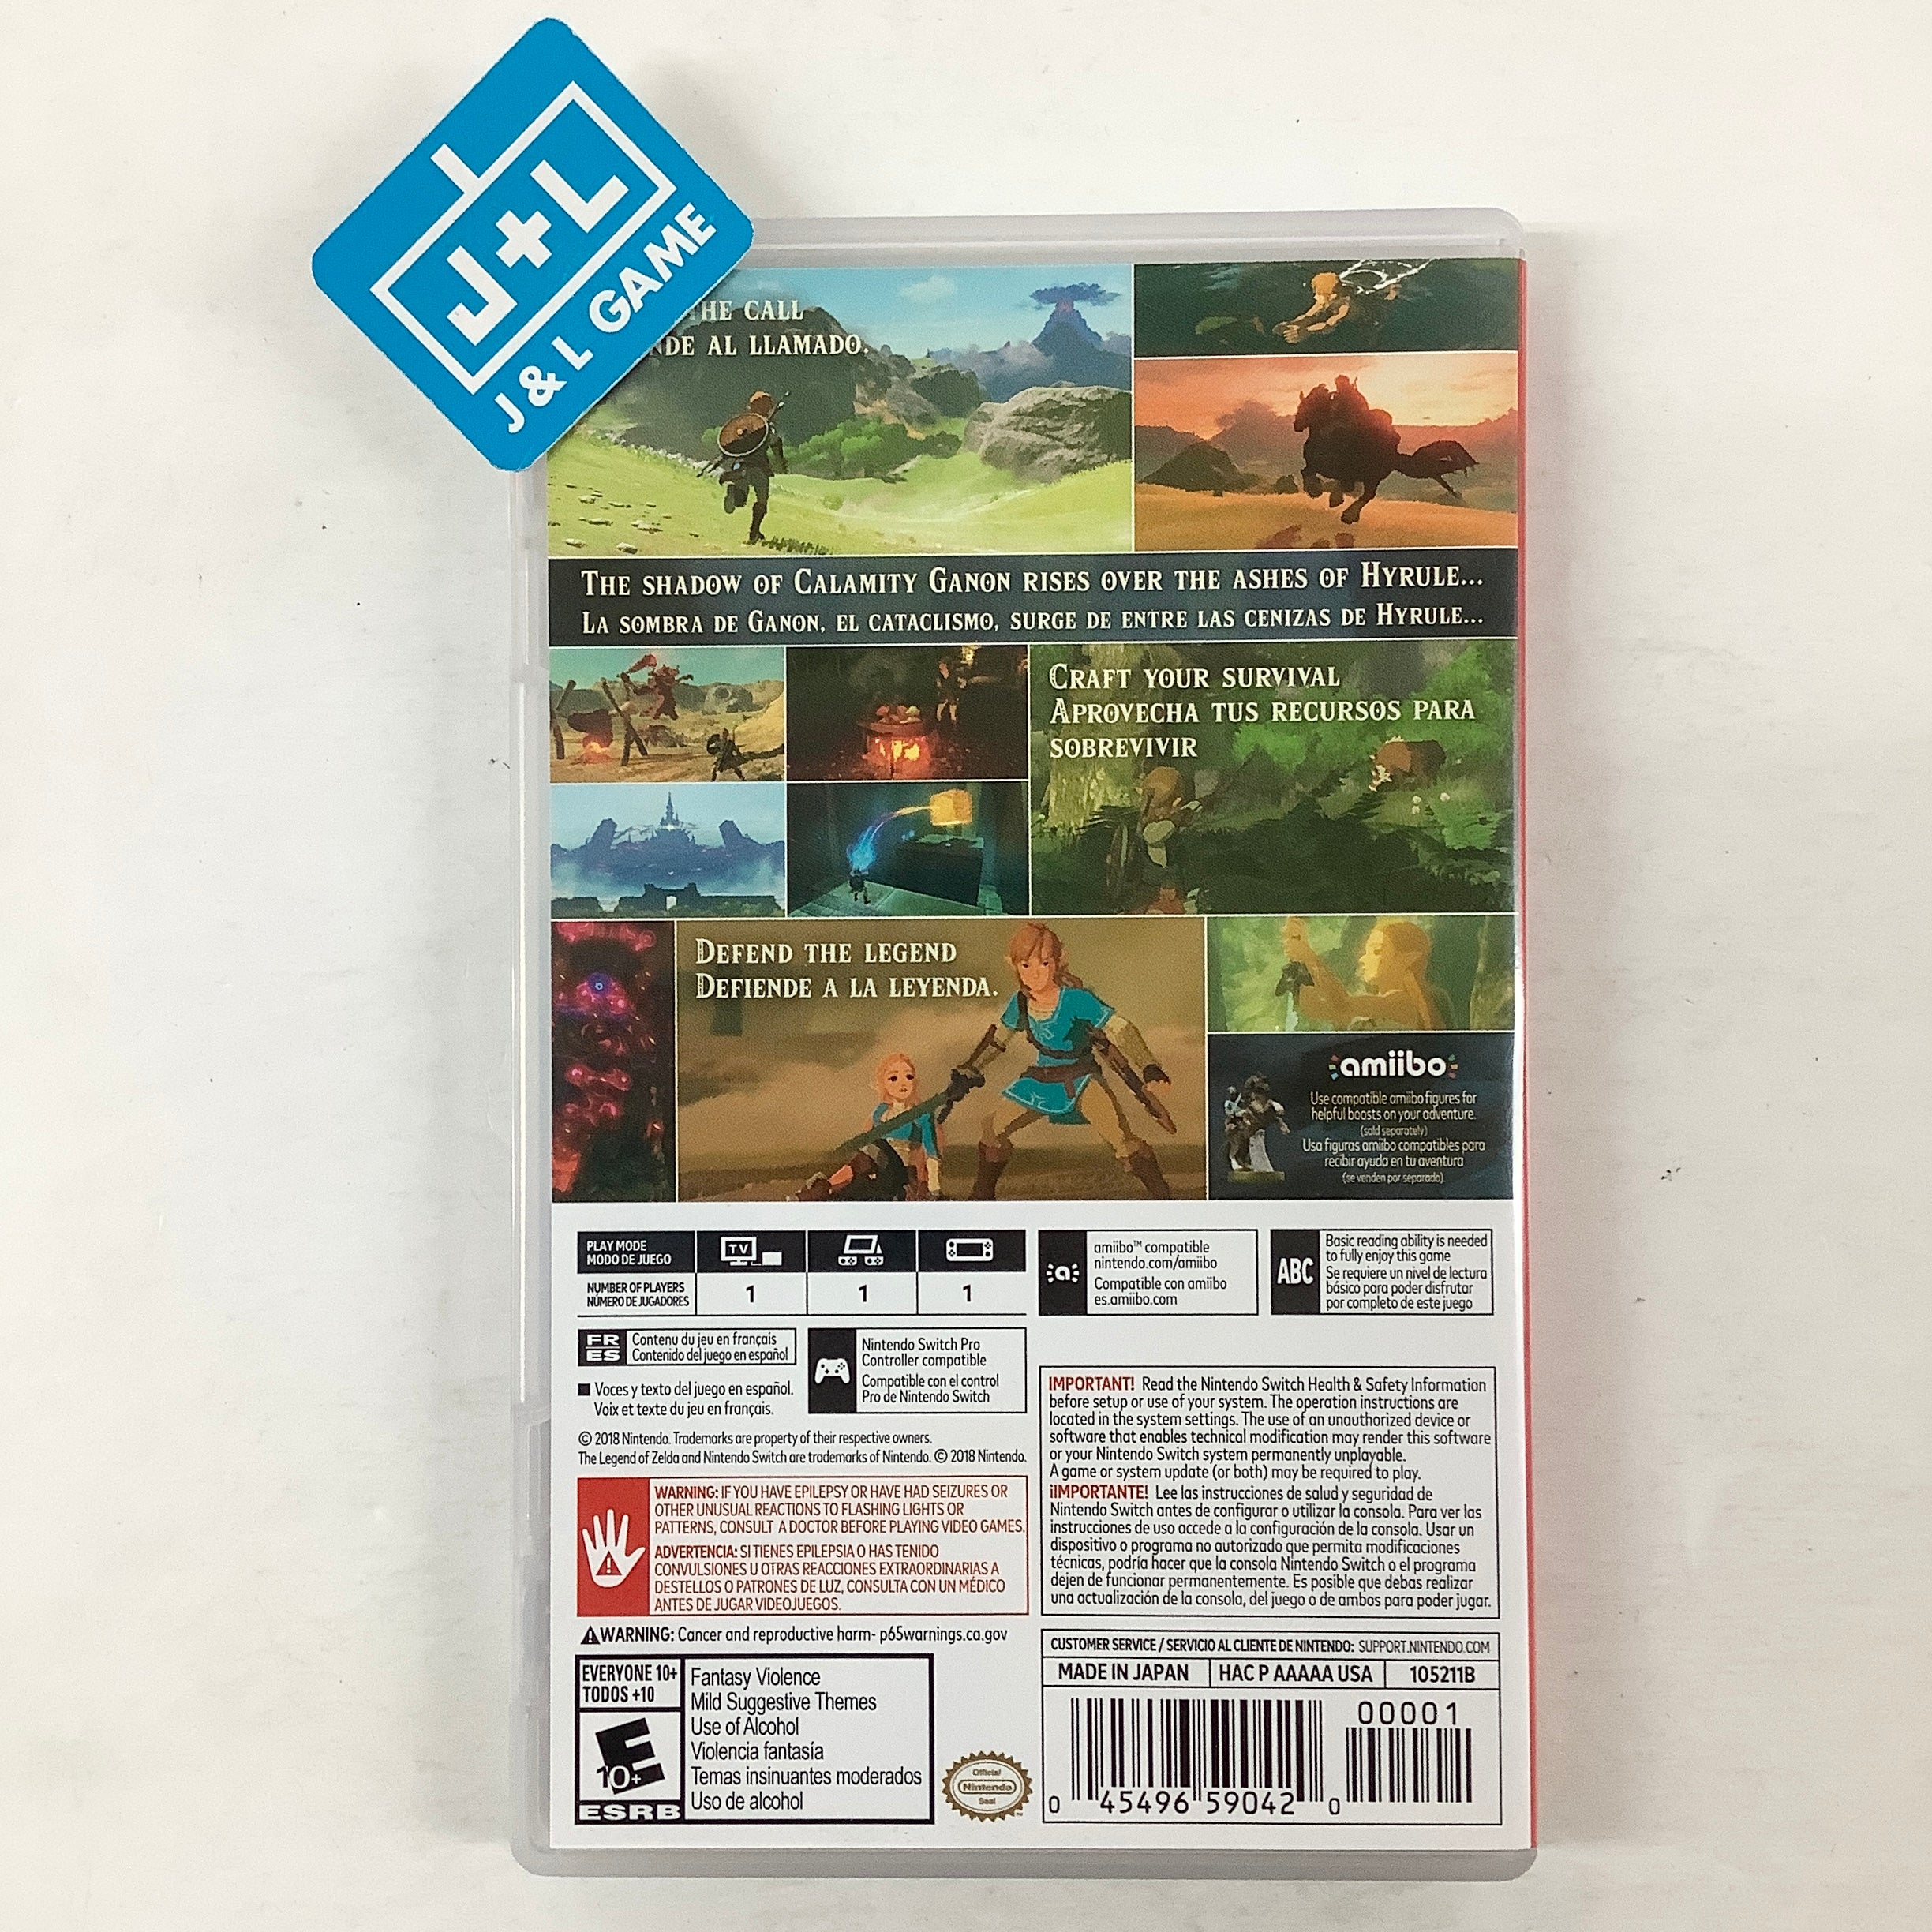 The Legend of Zelda: Breath of the Wild - (NSW) Nintendo Switch [Pre-Owned] Video Games Nintendo   